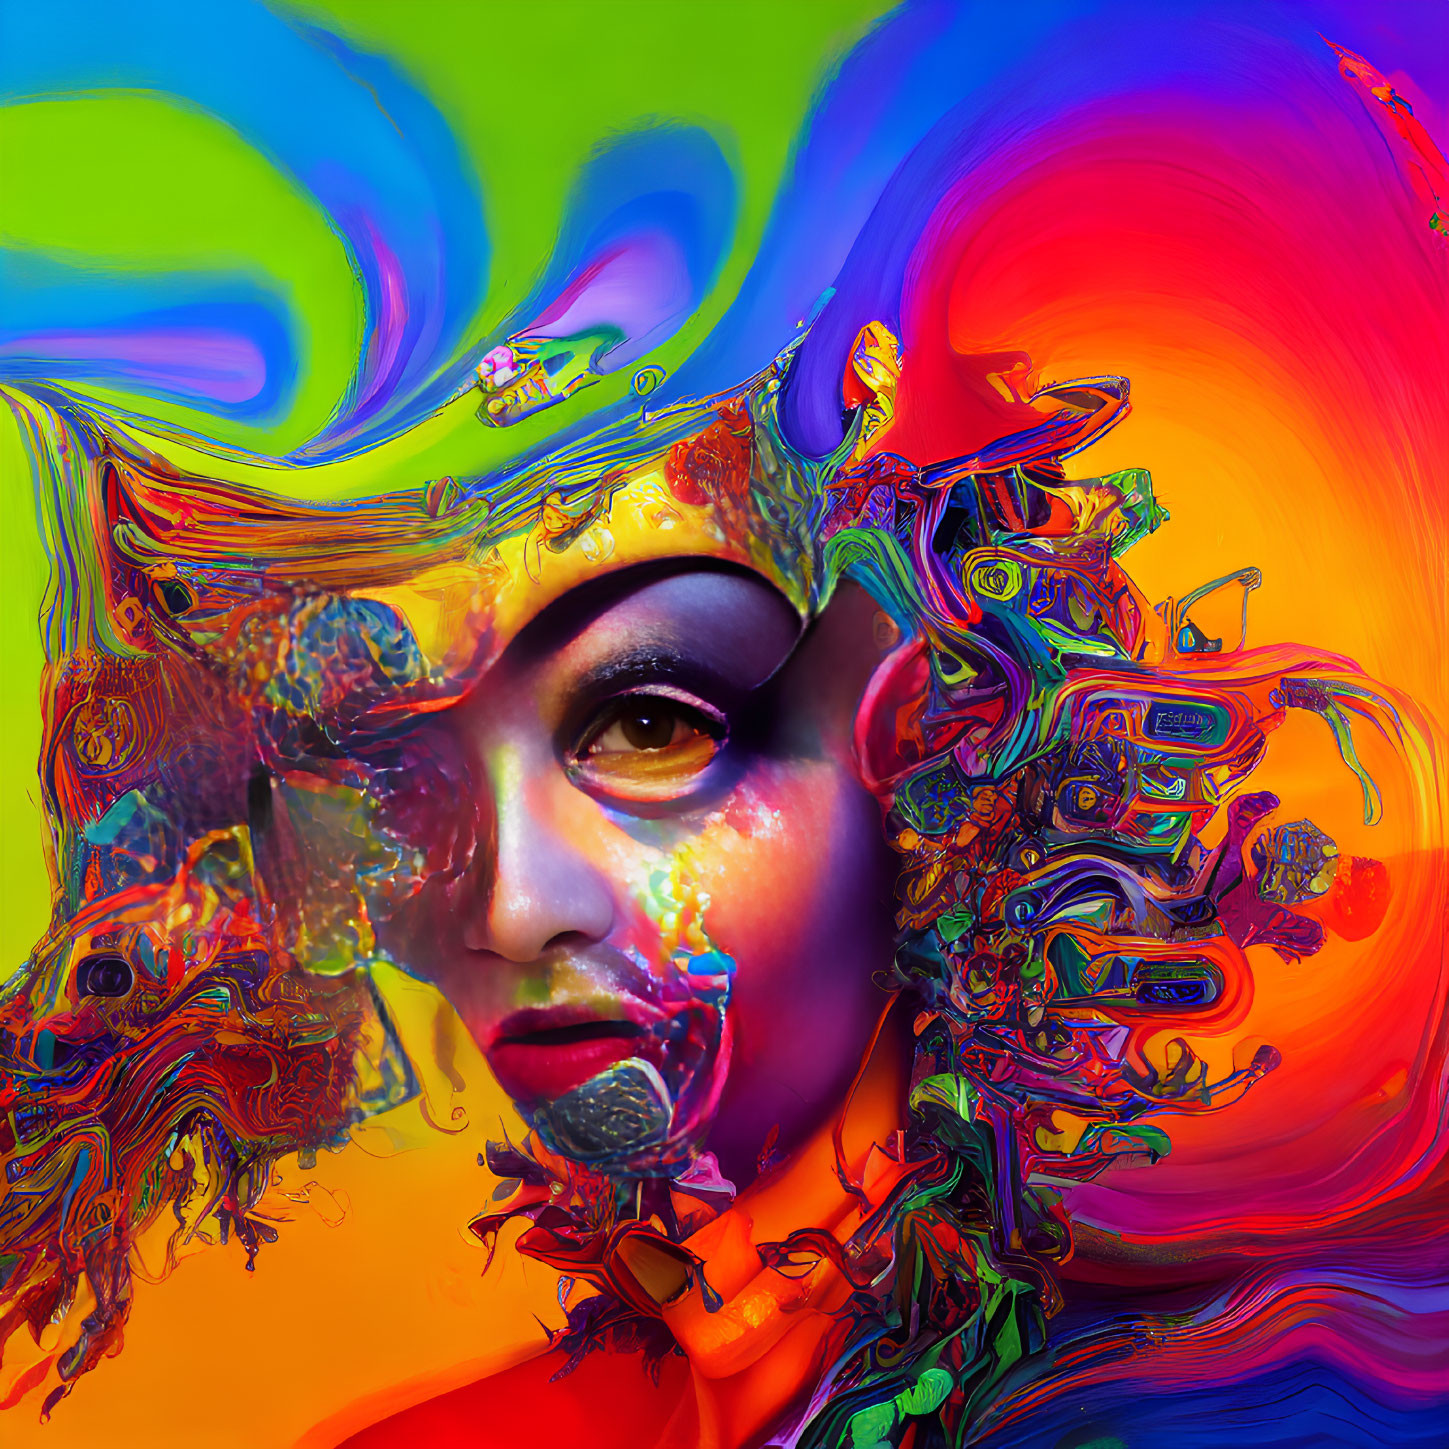 Colorful Abstract Digital Art of Woman's Face with Swirling Elements